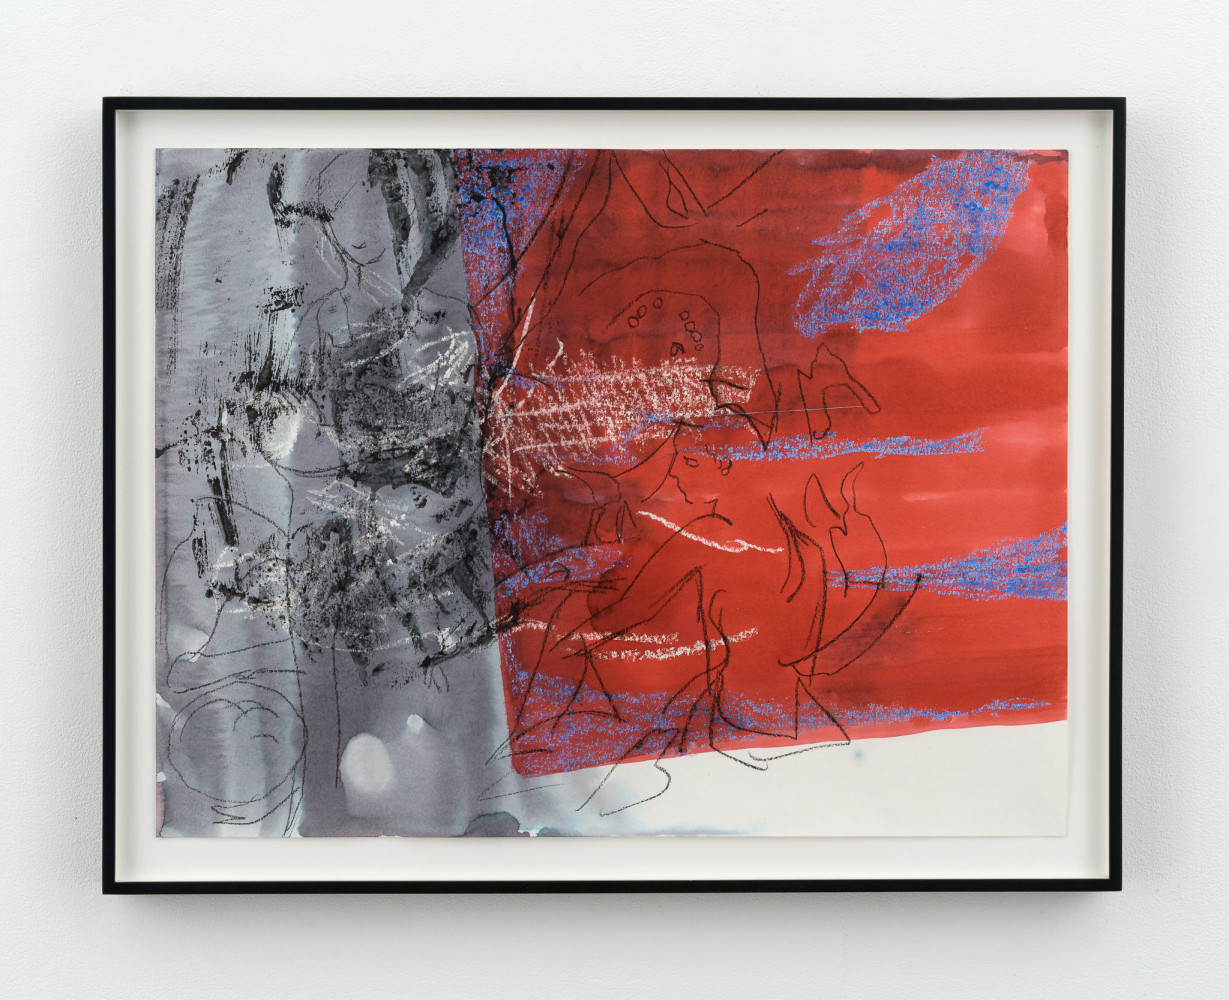 Nick Mauss

Untitled

2020

Watercolor, encaustic, acrylic, and pencil on paper

18 x 24 inches (45.7 x 61 cm)

20 5/8 x 26 5/8 inches (52.4 x 67.6 cm) framed

Signed verso

NM 798

$20,000